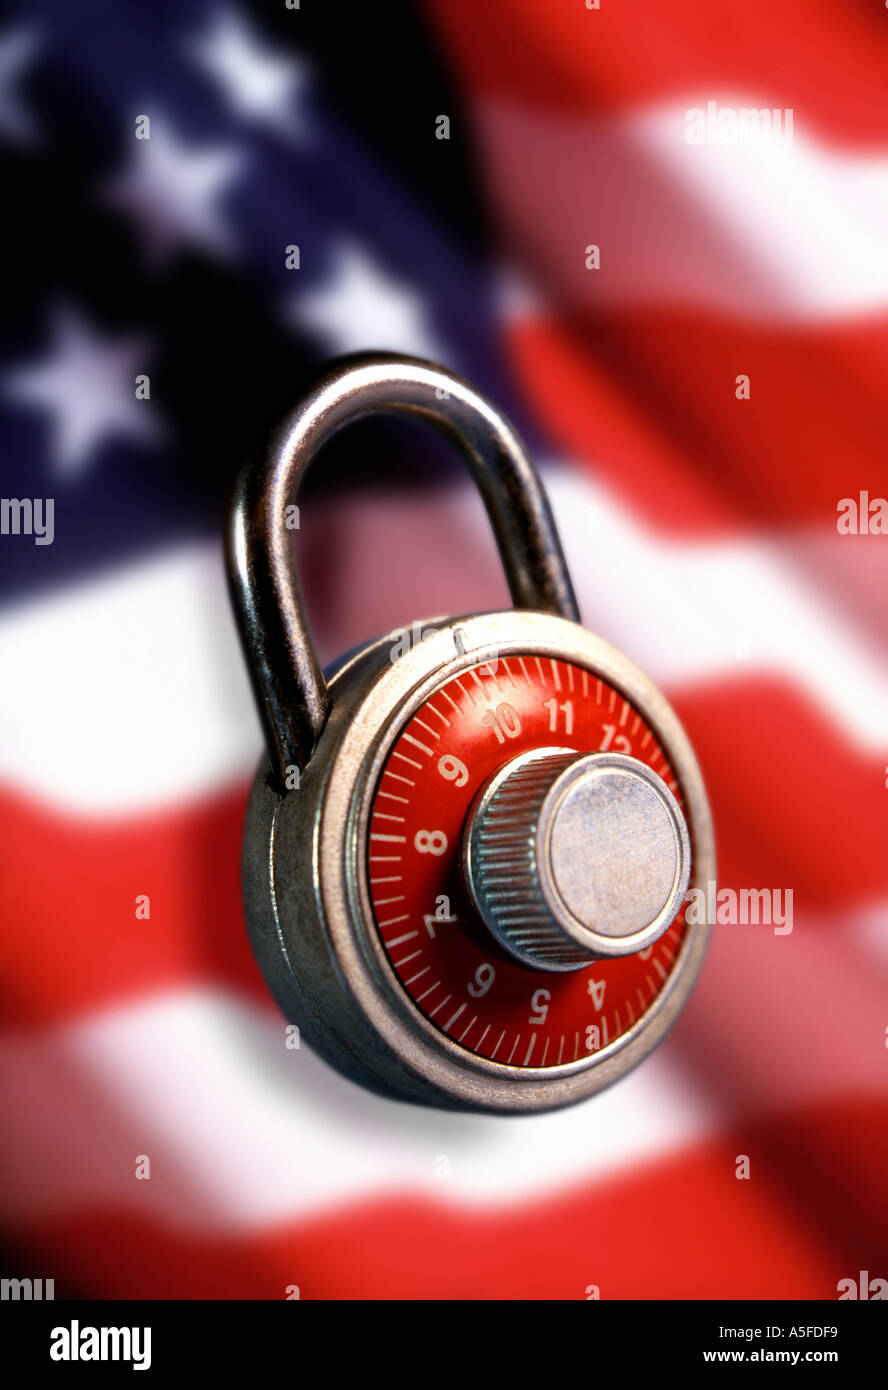 US flag with security lock Stock Photo